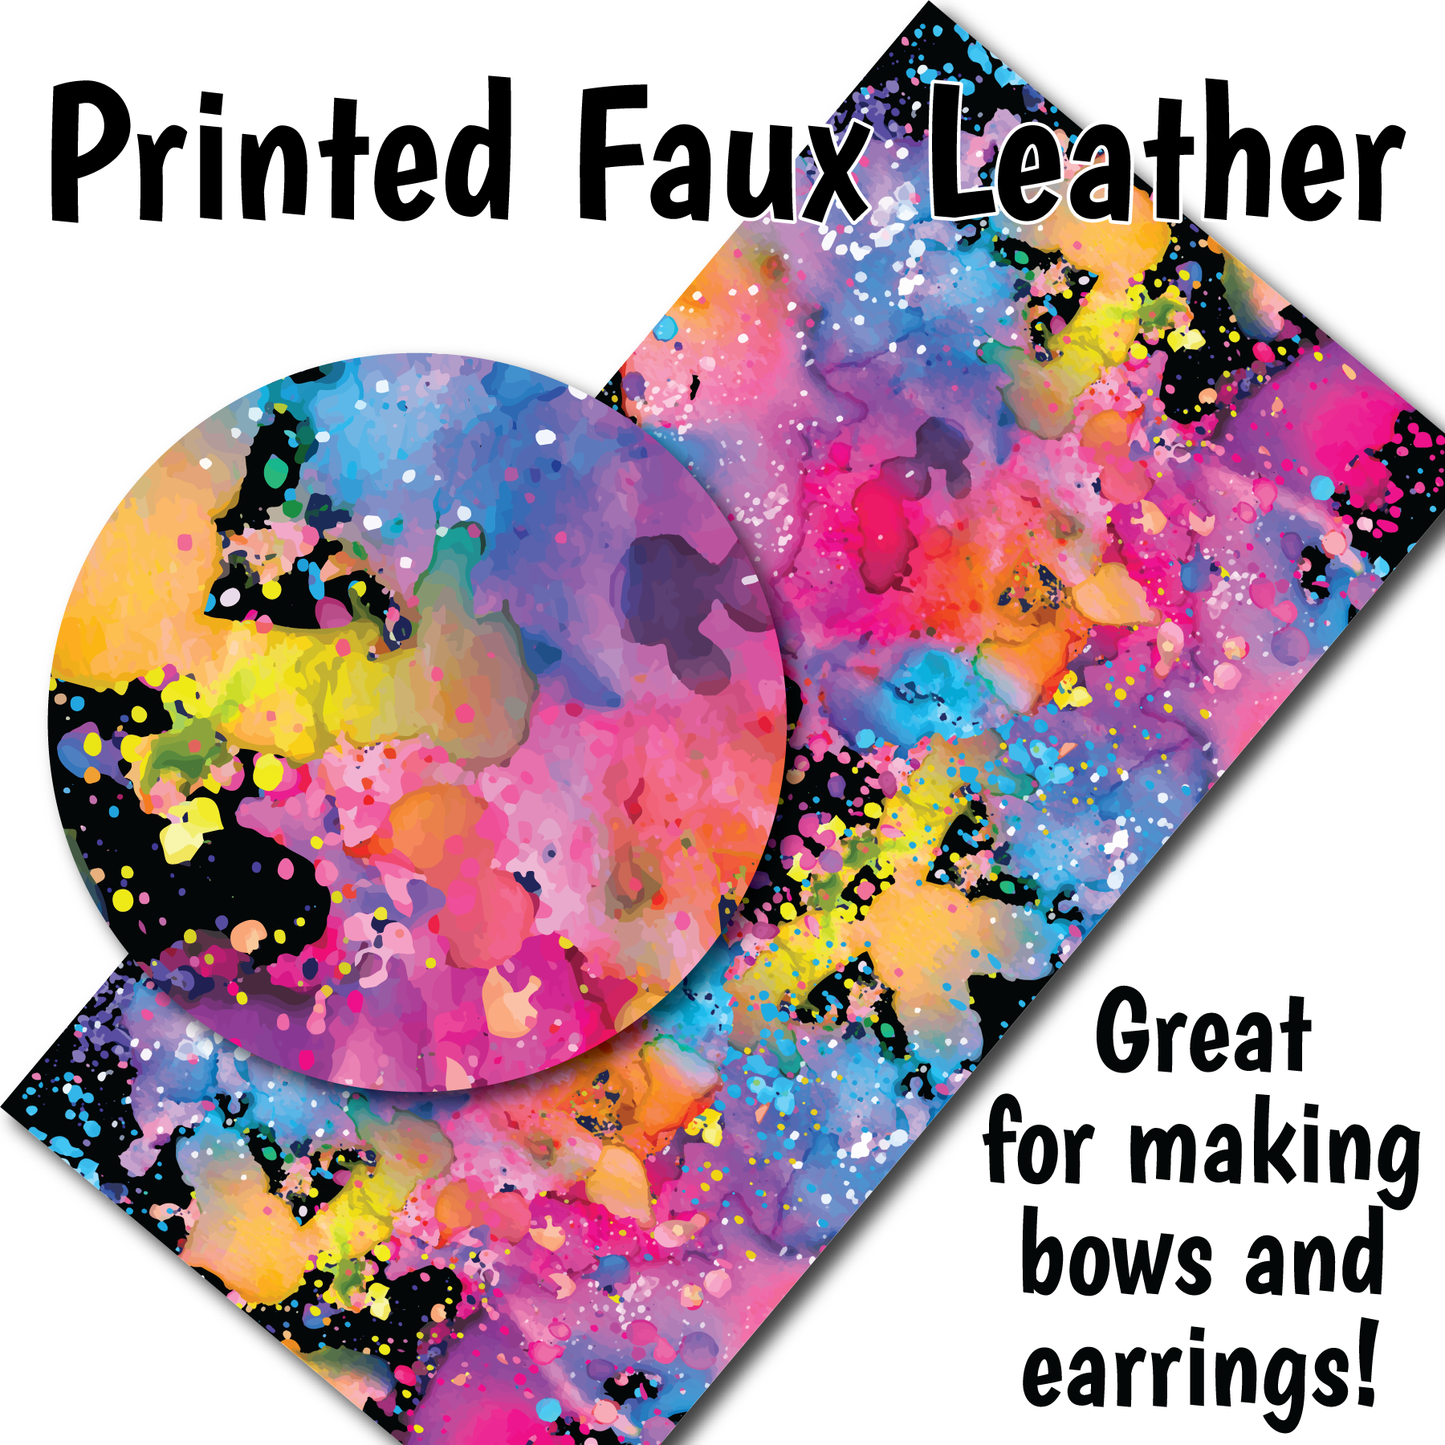 Colorful Splatter - Faux Leather Sheet (SHIPS IN 3 BUS DAYS)